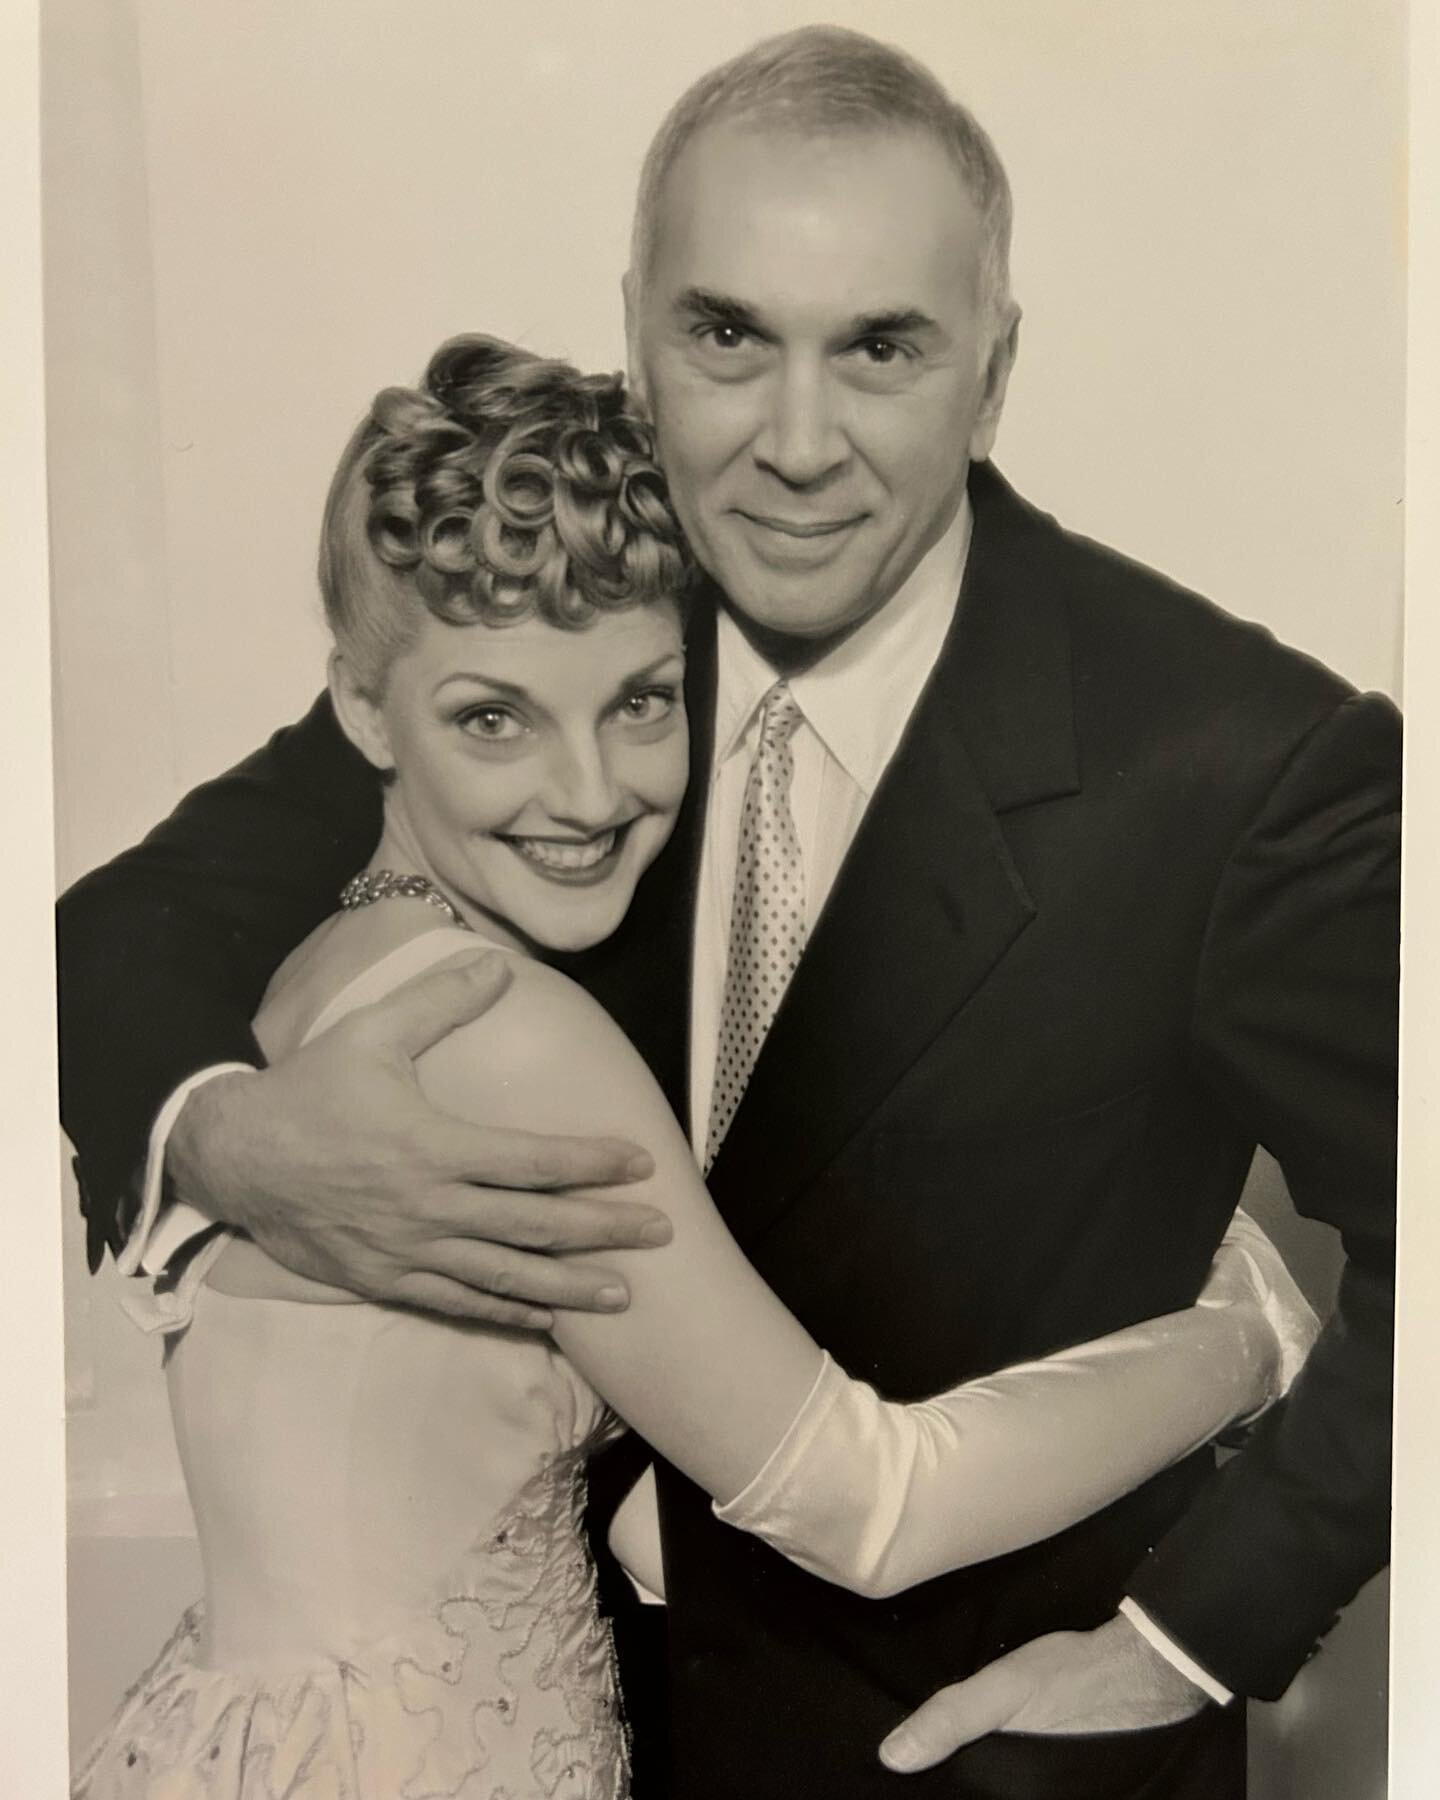 Way Back Wednesday to my Broadway  Debut leading man. Fun days! @franklangellaofficial #Noelcoward #cleaning=treasures!